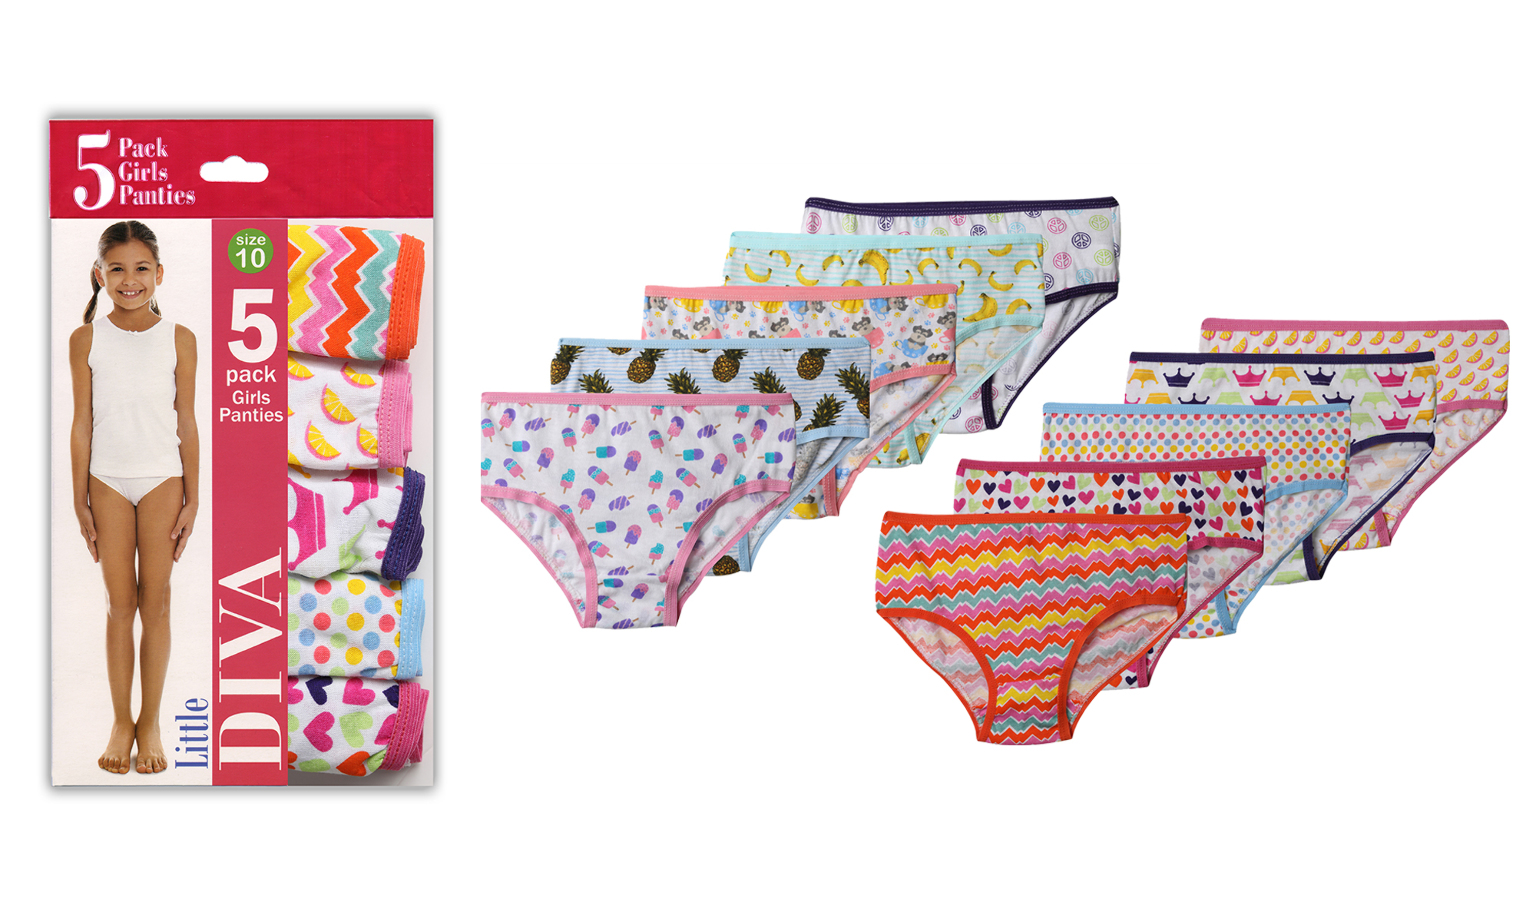 Girl's Panties - Assorted Prints, Size 8, 5 Pack